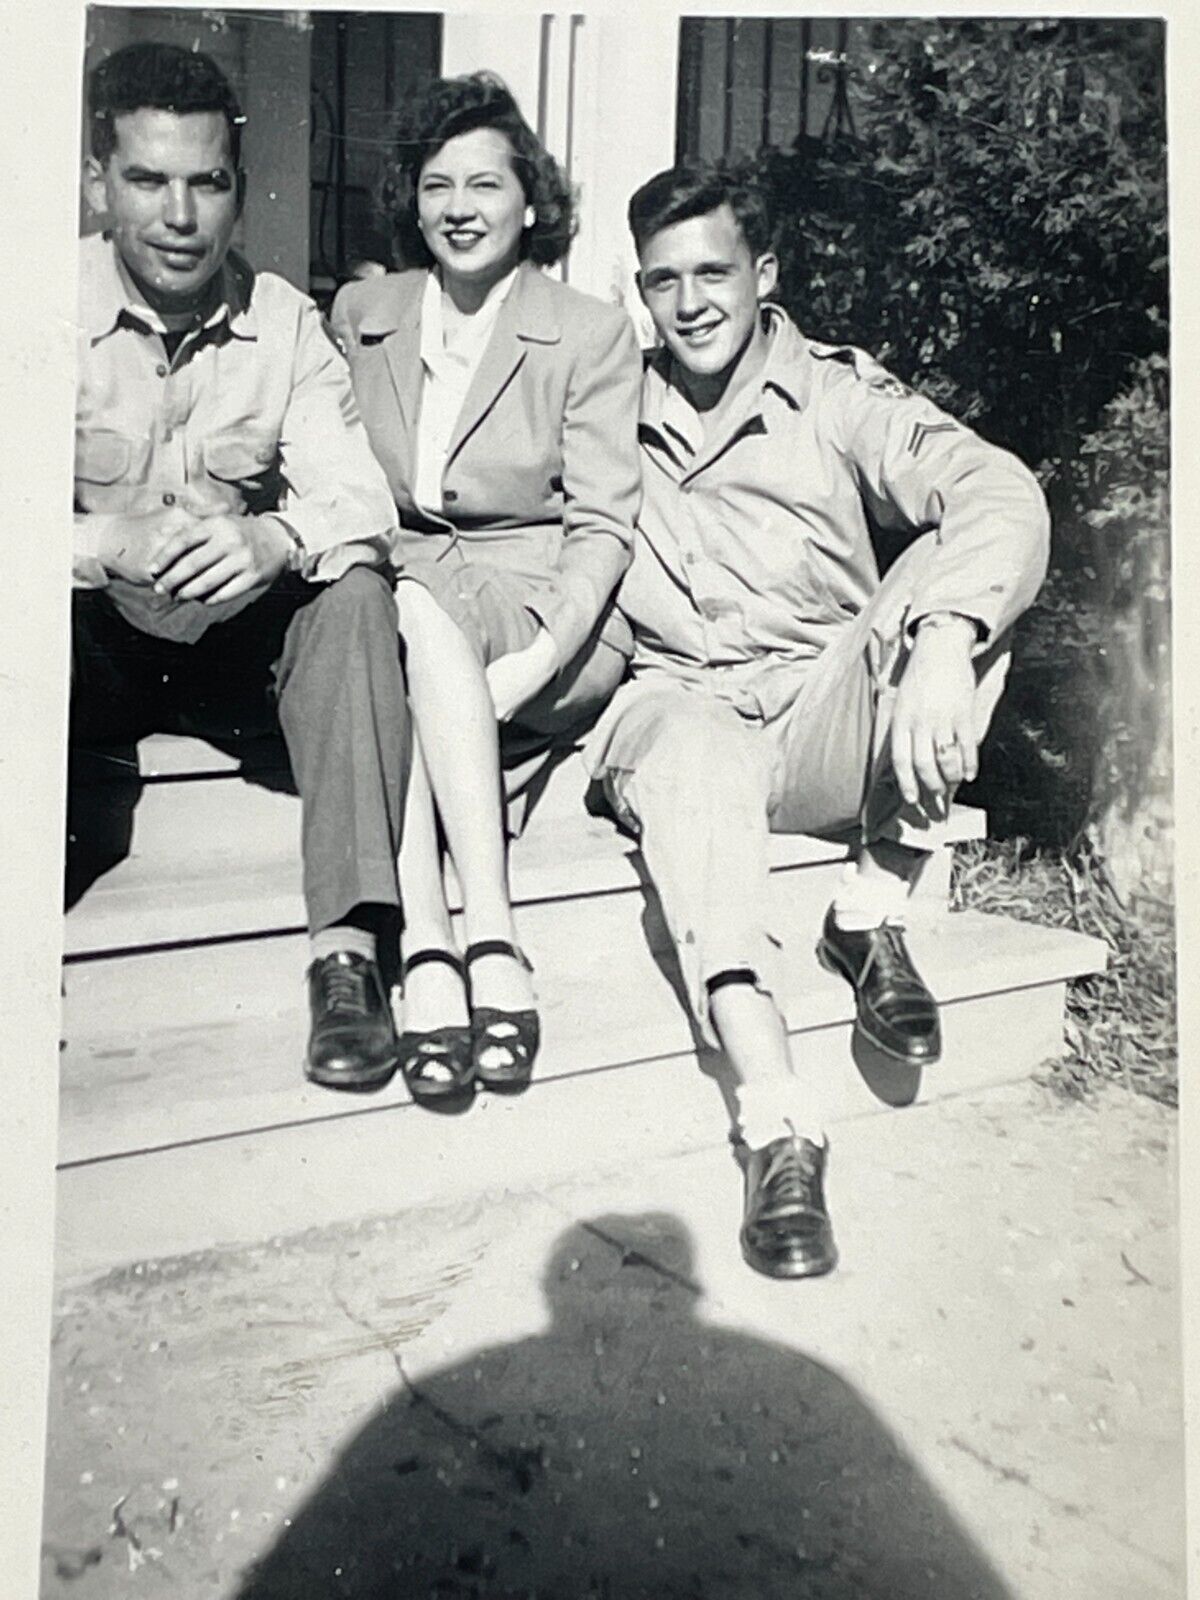 AZD Photograph Handsome Men Posing With Lovely Pretty Beautiful Woman 1946 Texas